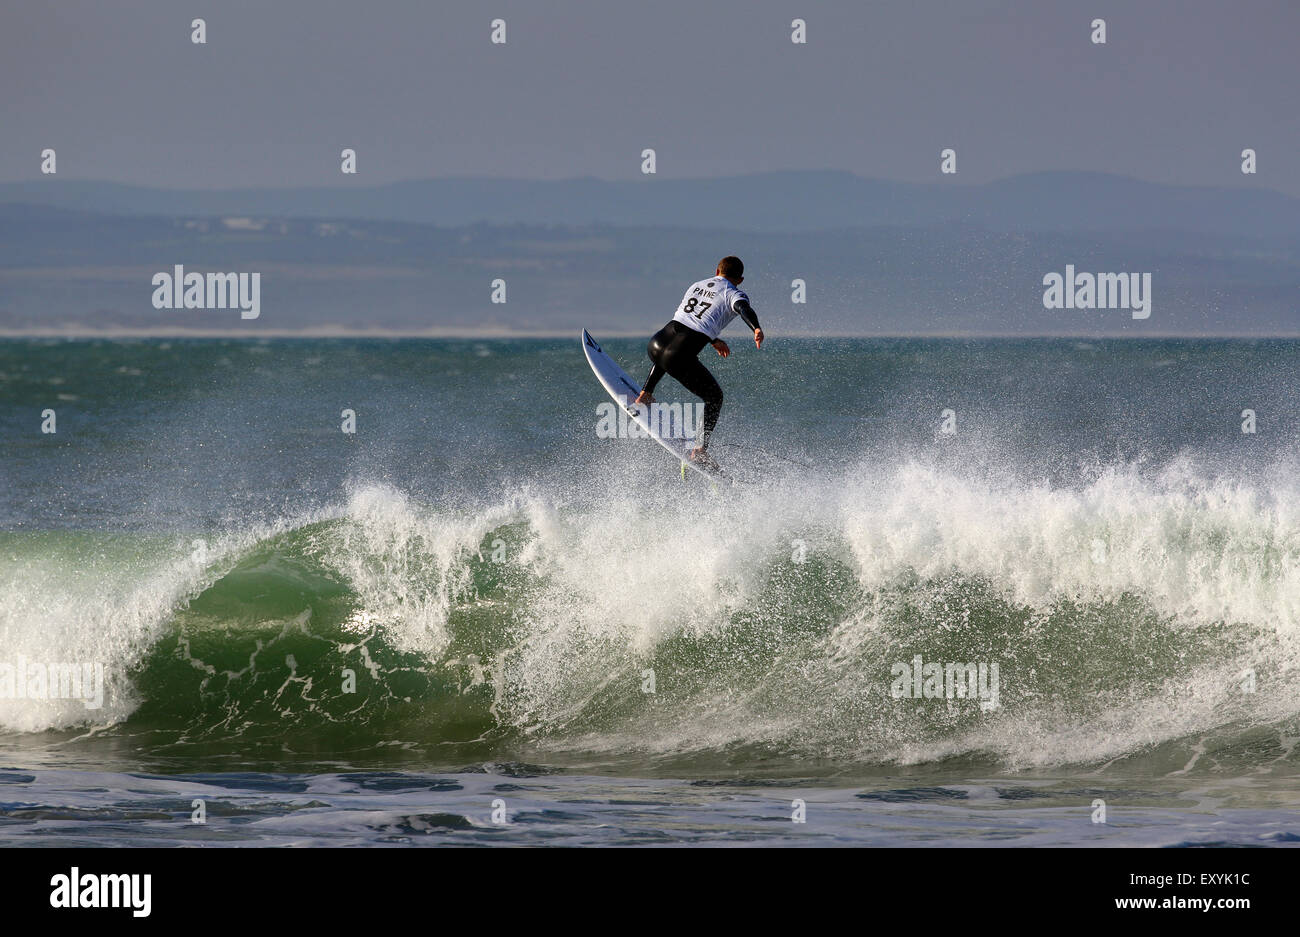 Hawaiian professional surfer Dusty Payne in action at the 2015 J-Bay Open surfing event in Jeffreys Bay, South Africa Stock Photo